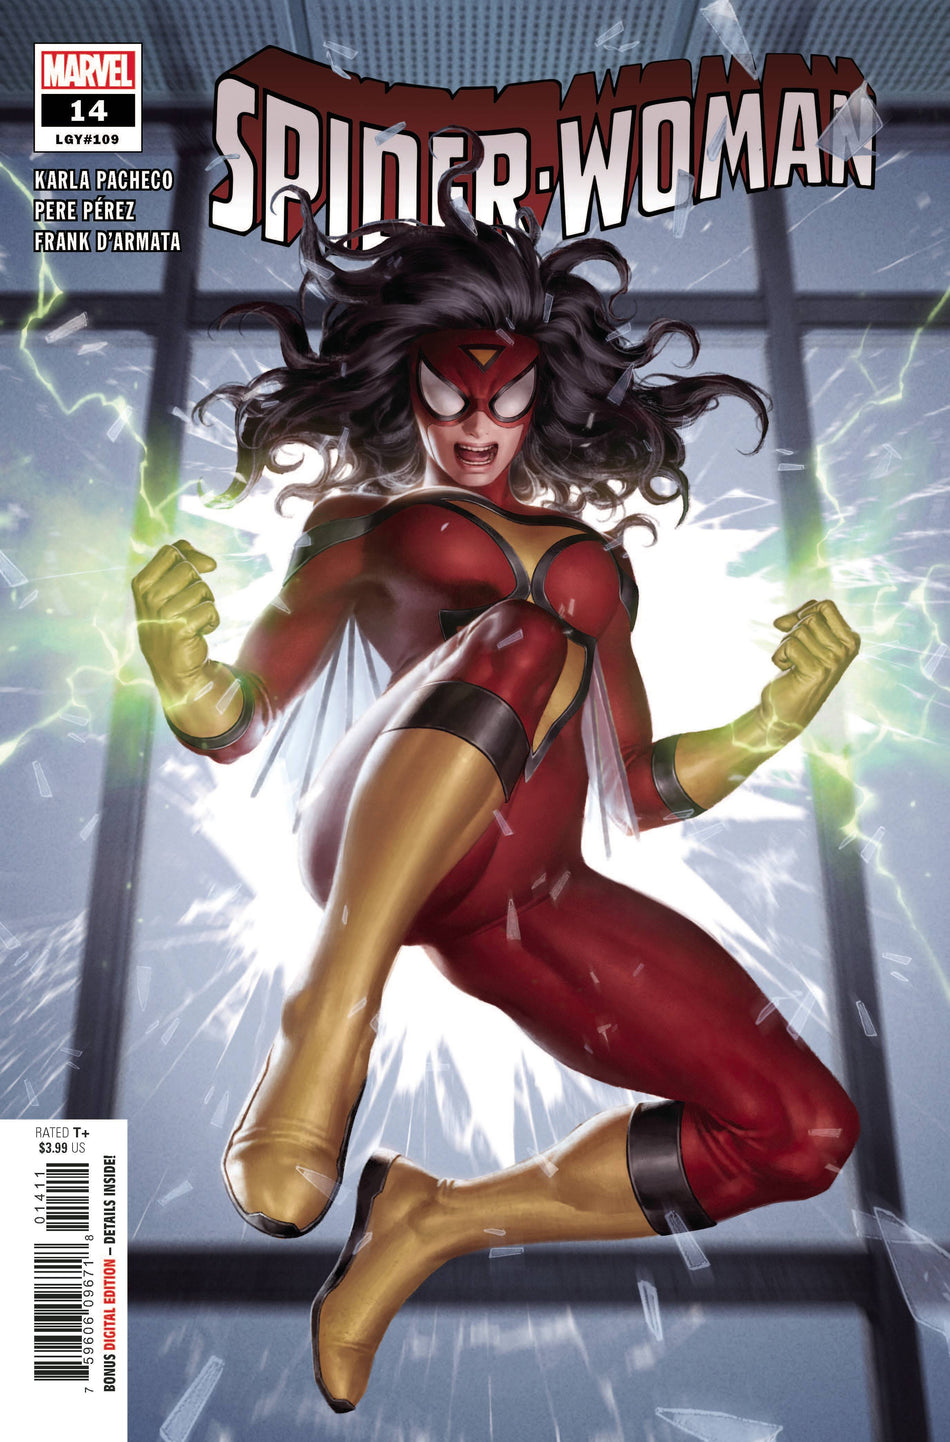 Photo of Spider-Woman Issue 14 comic sold by Stronghold Collectibles